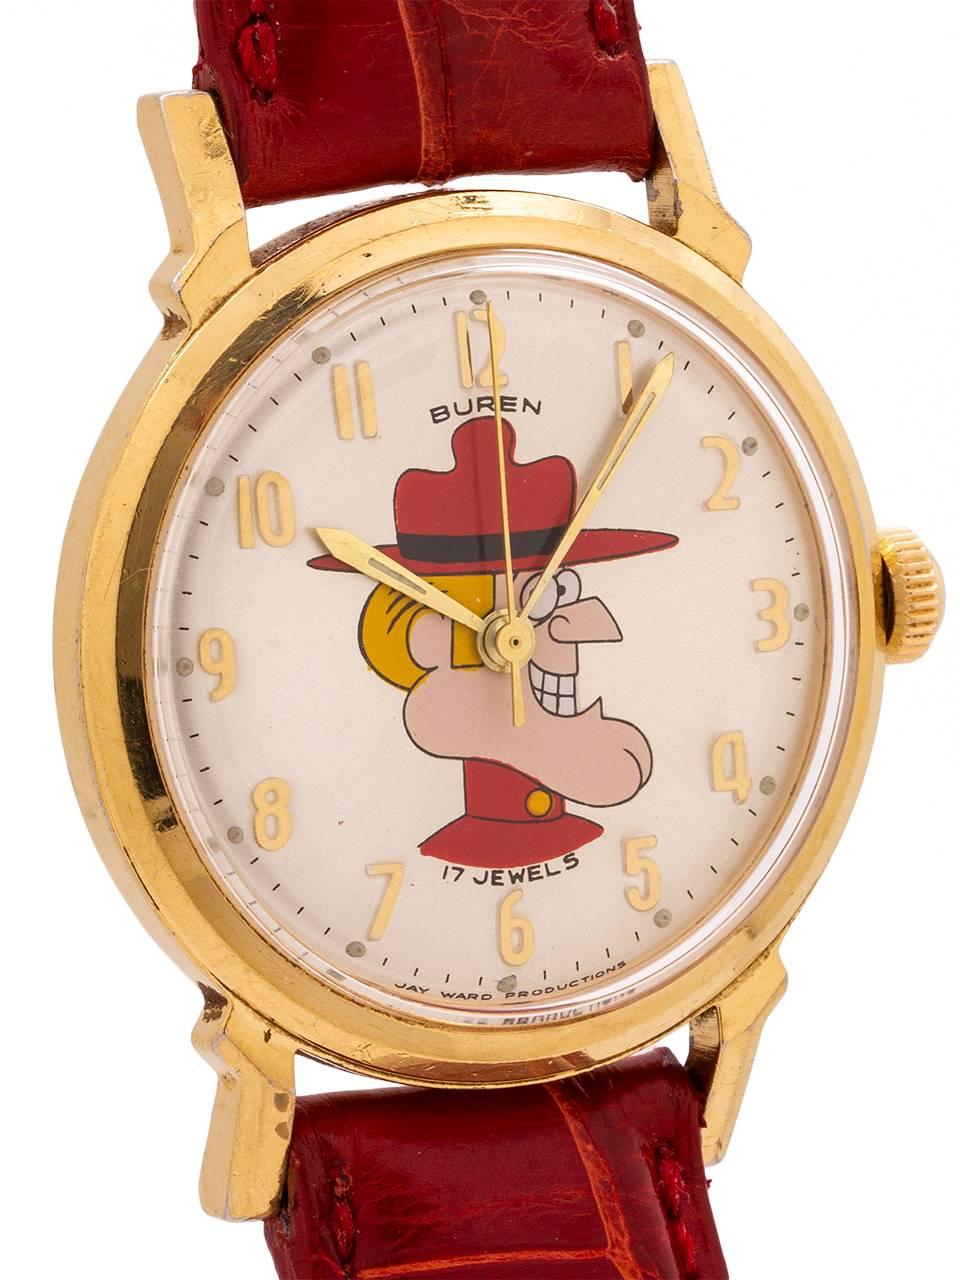 
Scarce and great condition example Dudley Do-Right 17 jewel manual wind adult size 33mm Swiss made model by Buren. The original dial features the beloved Jay Ward cartoon series Rocky and Bullwinkle character Dudley Do-Right. The silvered dial is